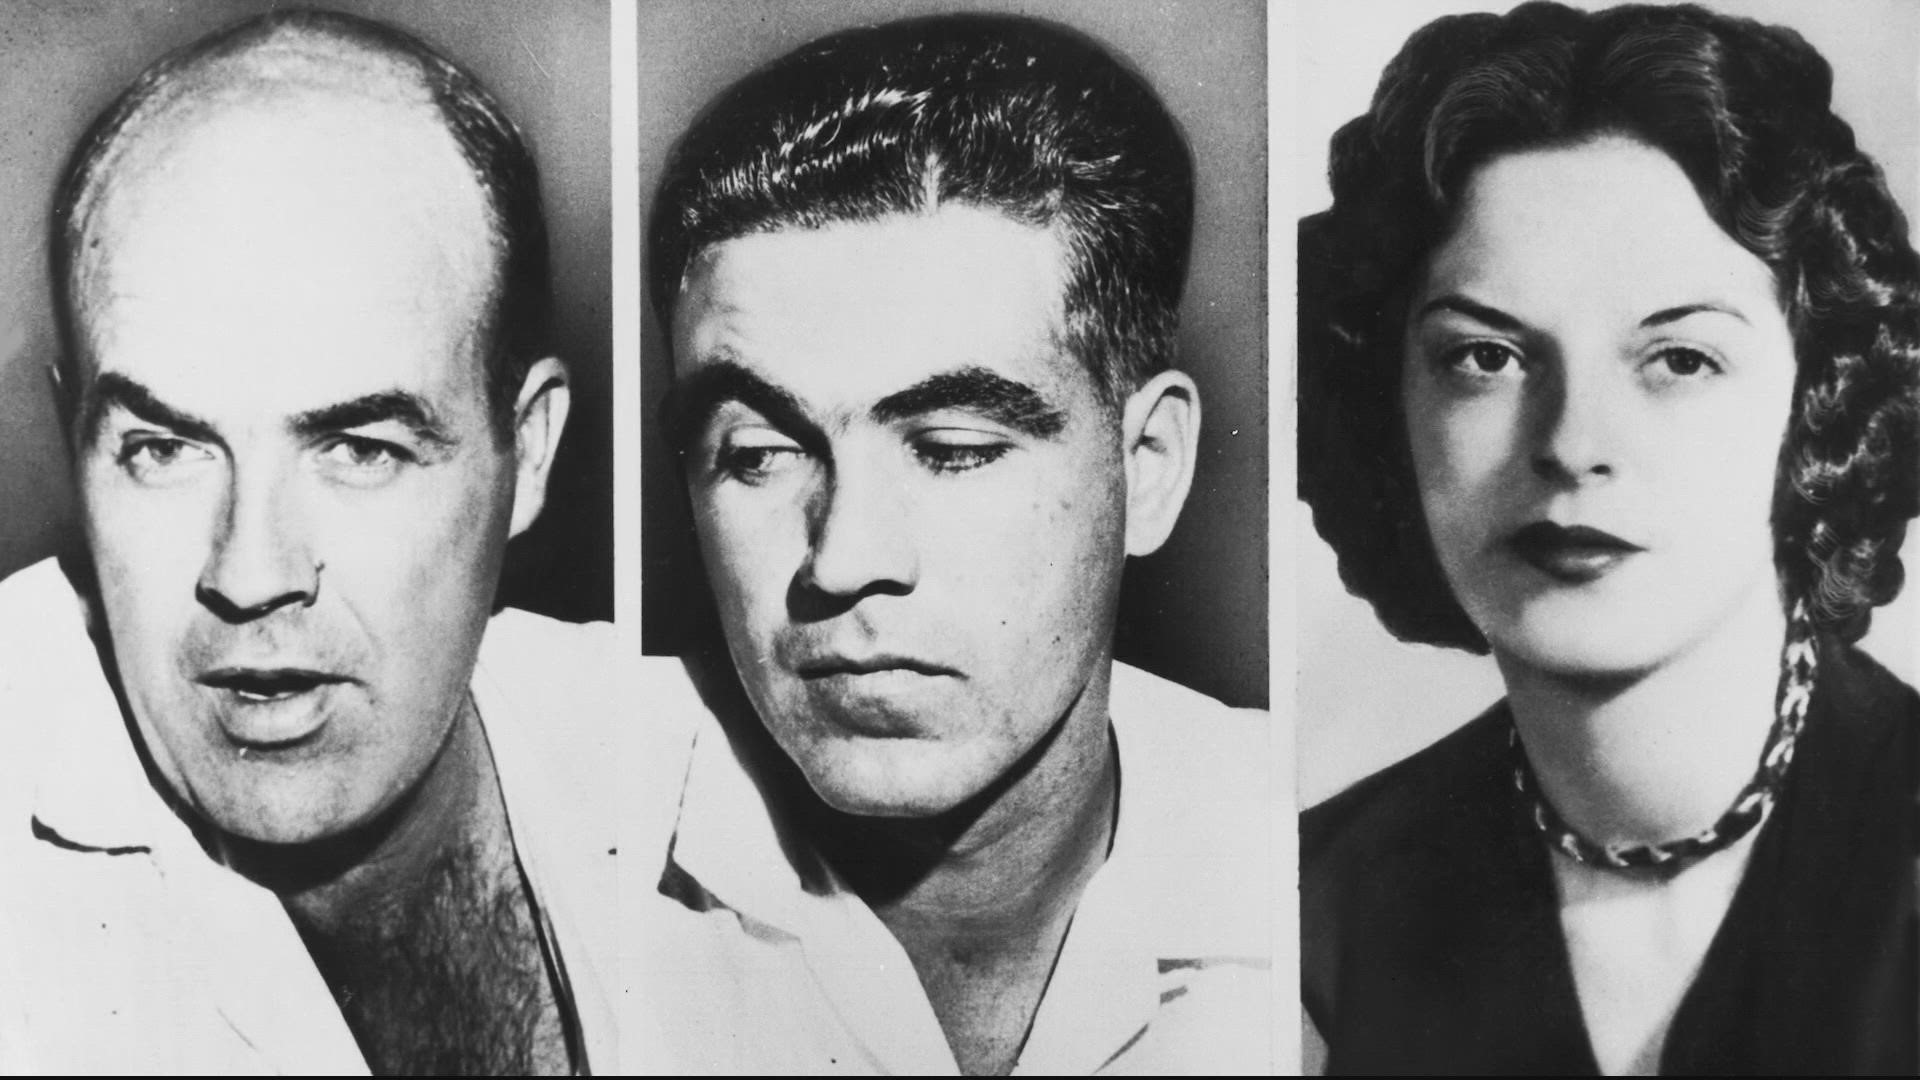 Today in 1955, Roy Bryant and J.W. Milam were acquitted in the murder of Emmett Till